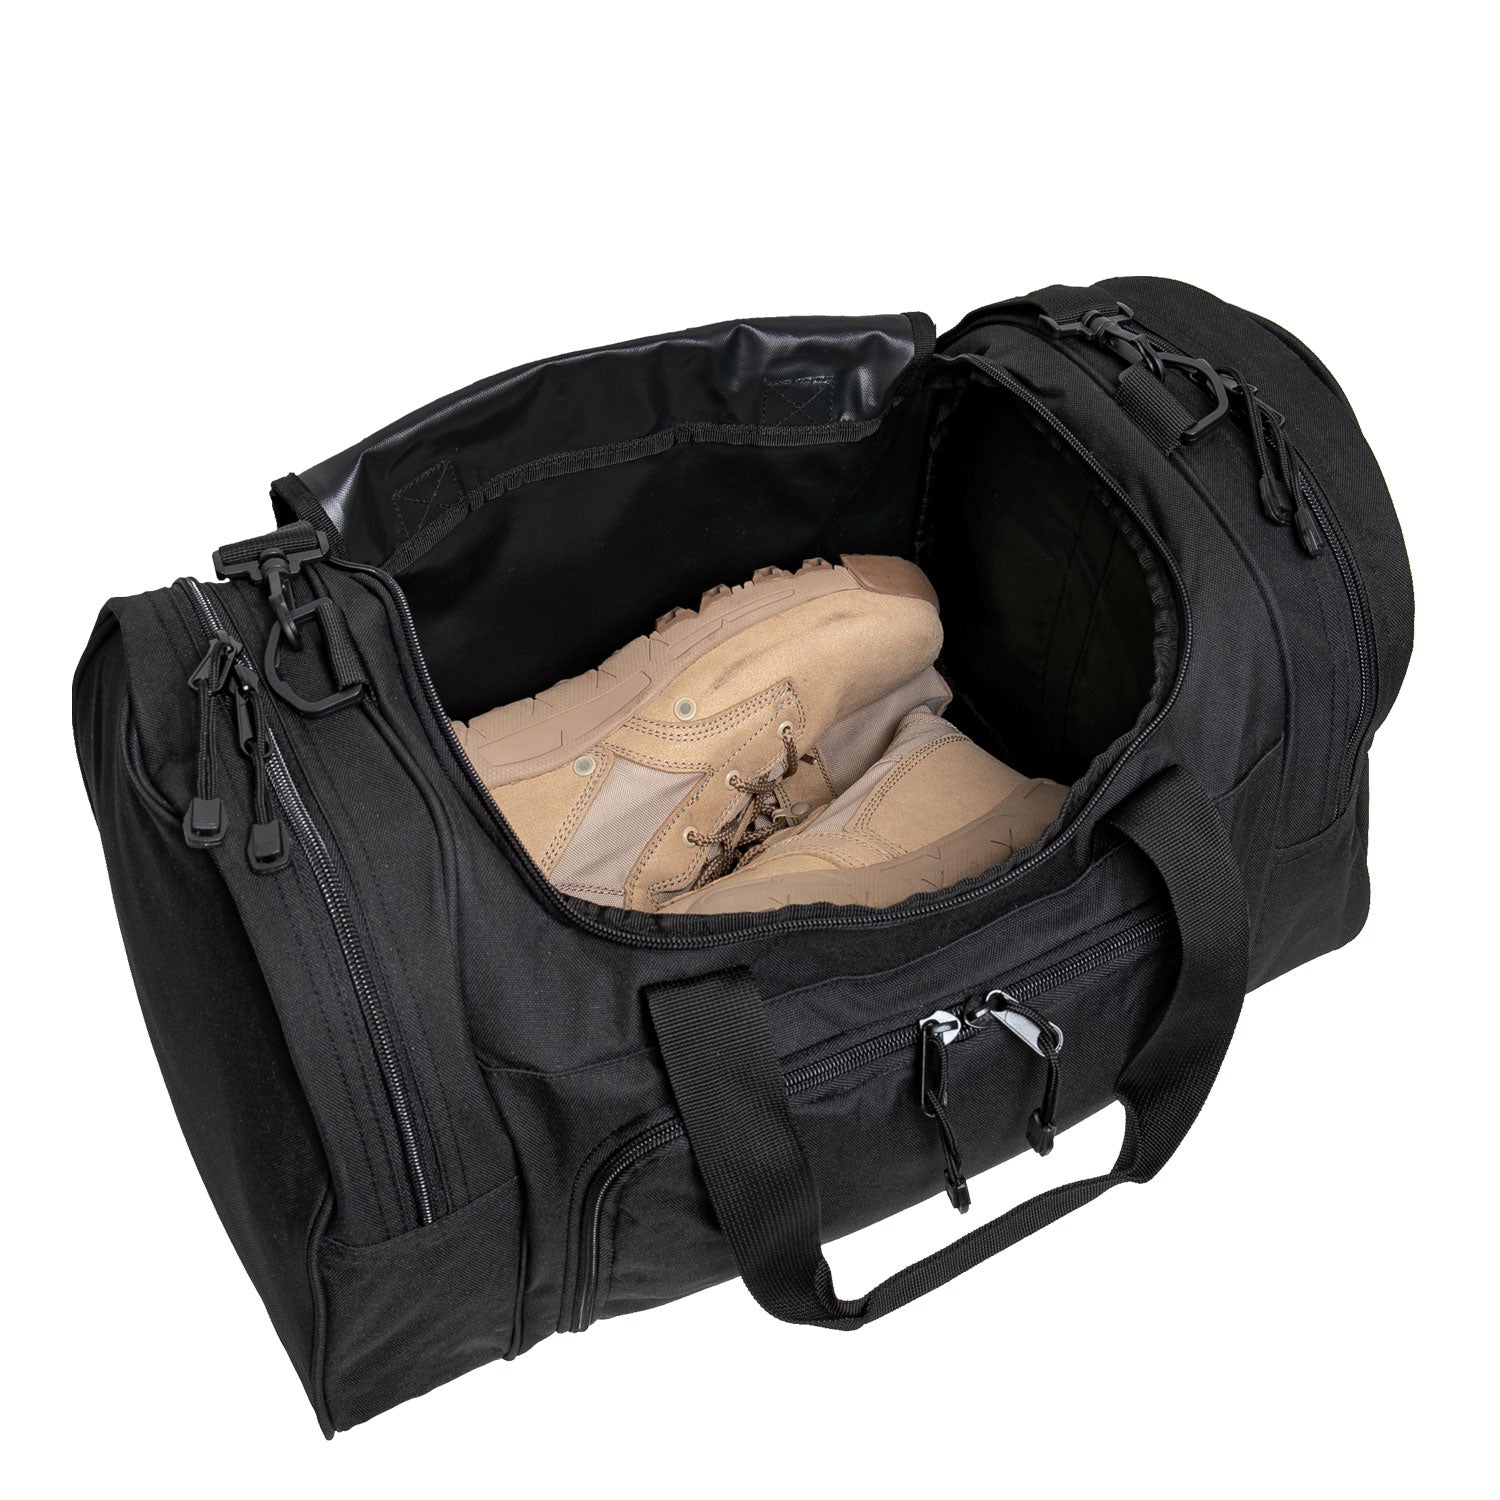 Sport Duffle Carry On Bag - Tactical Choice Plus